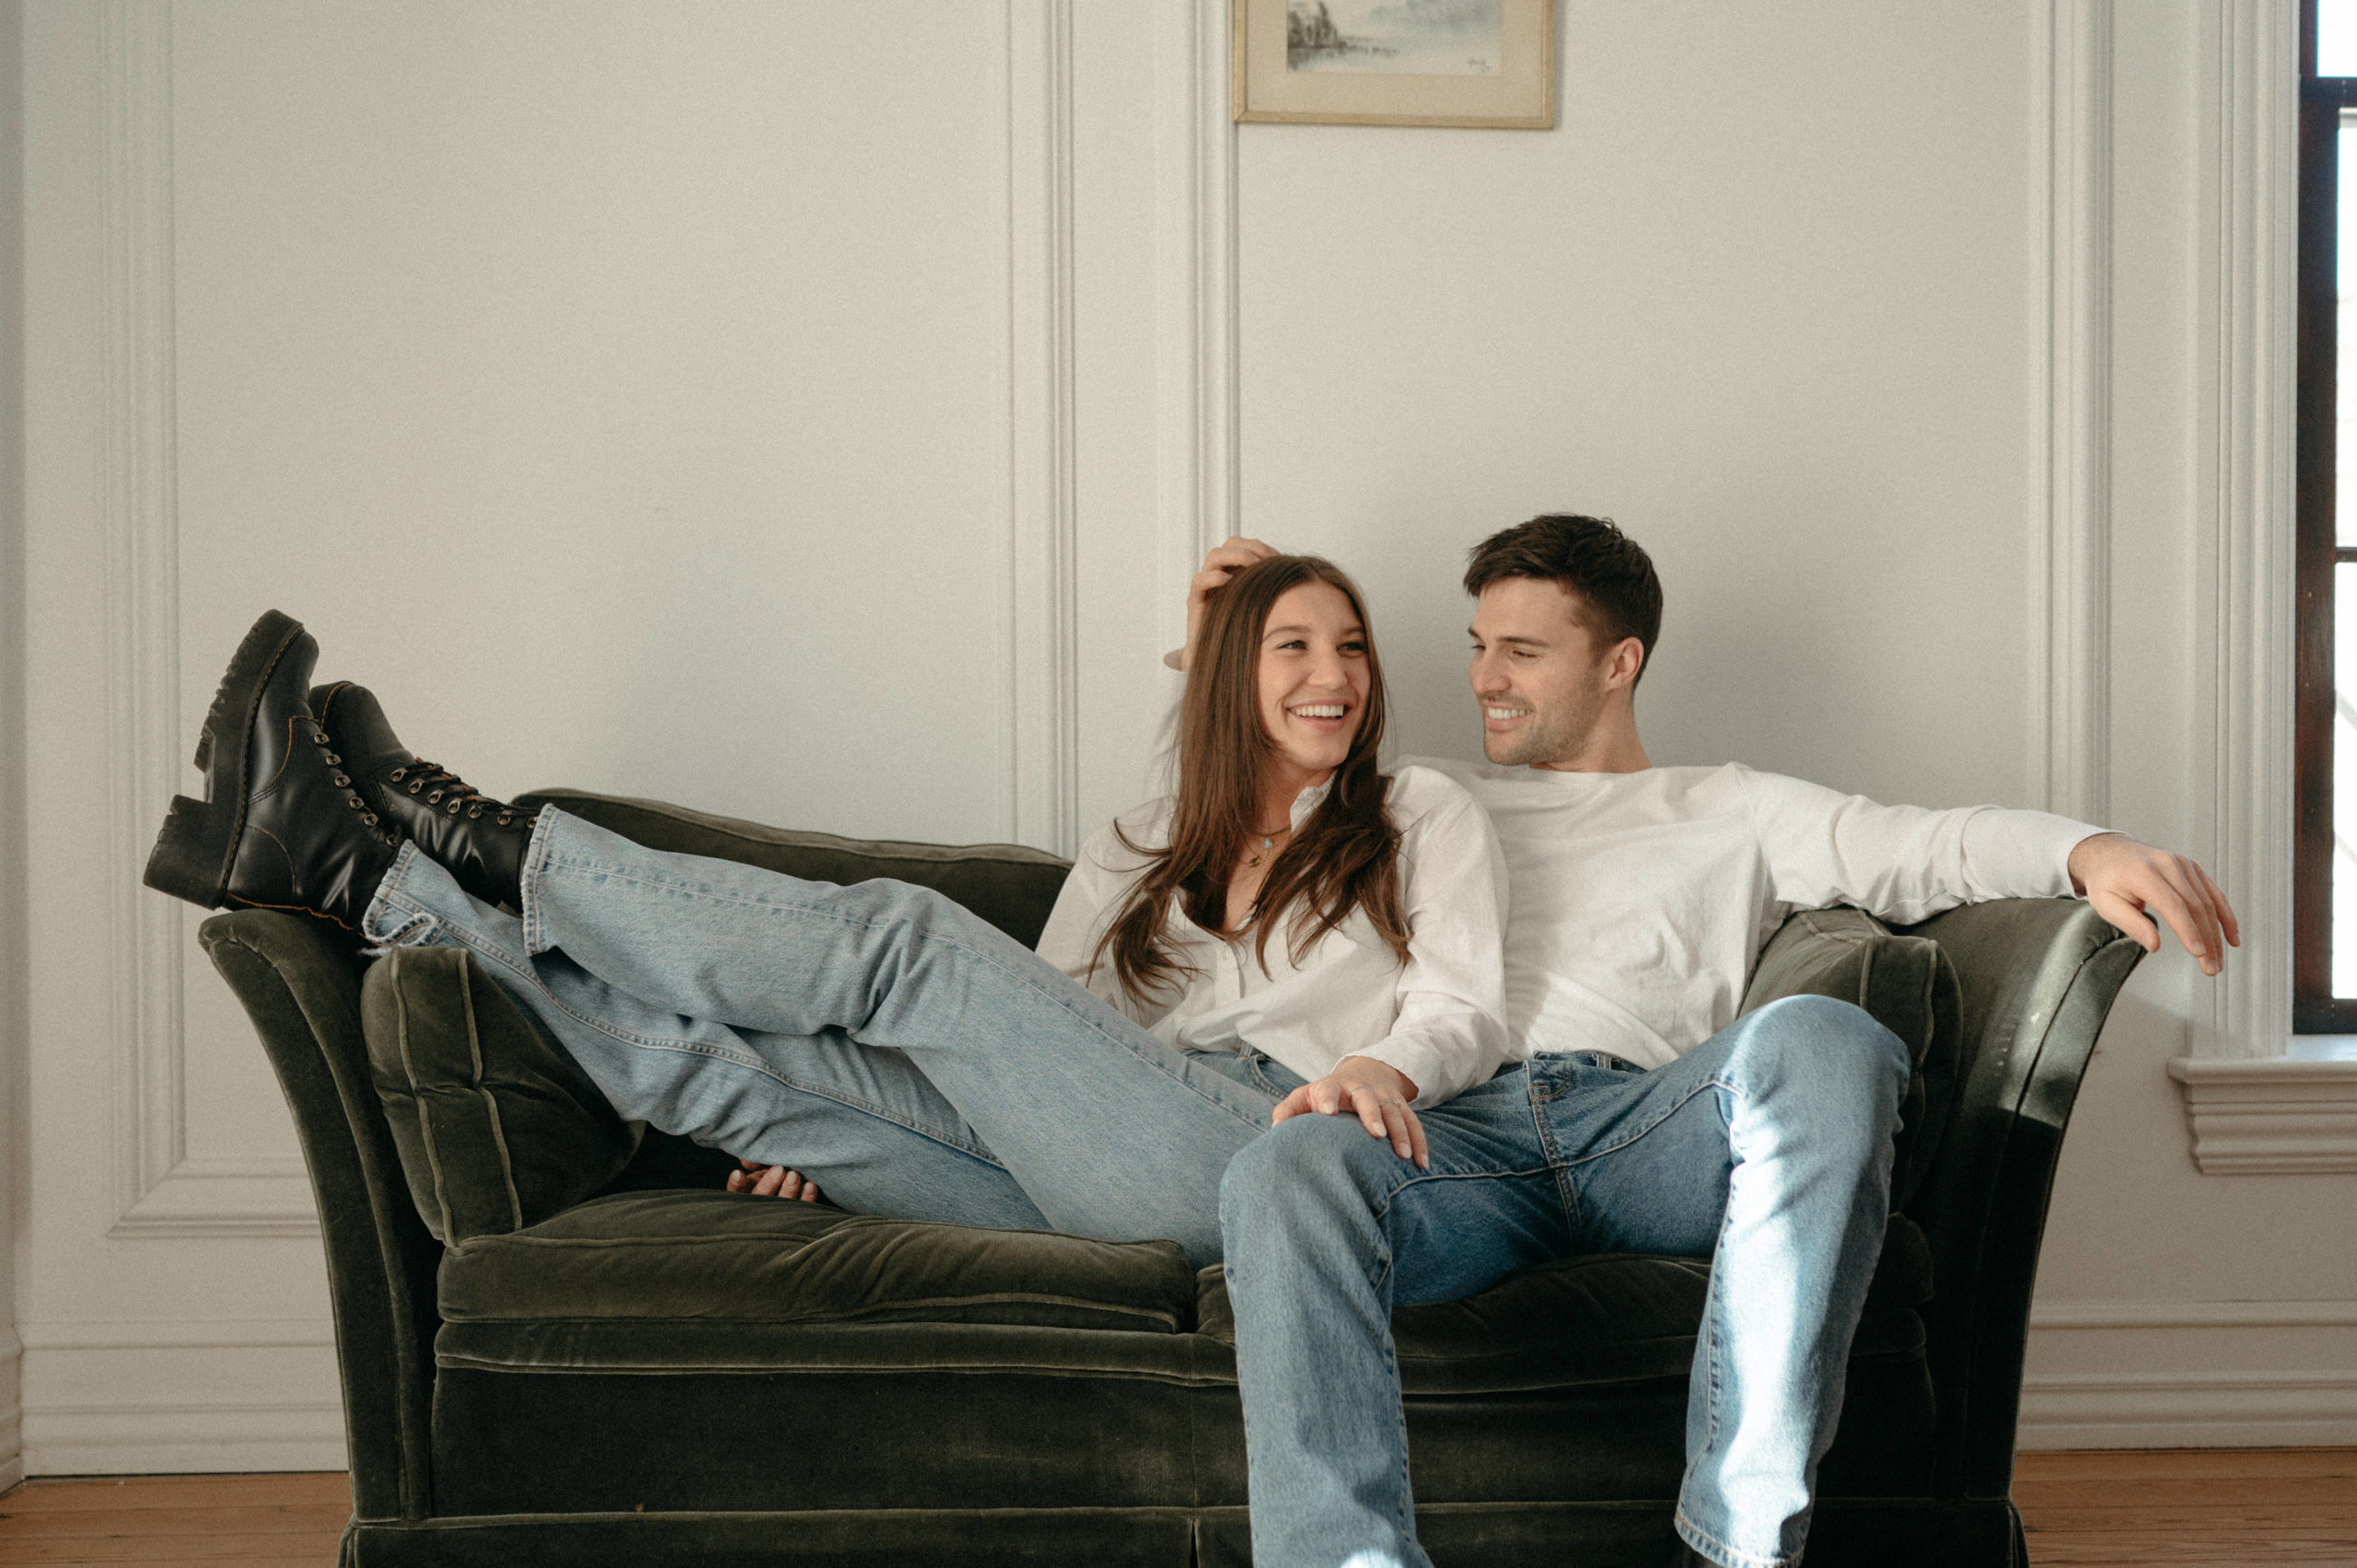 couple lounging out couch in blue jeans and white shirts